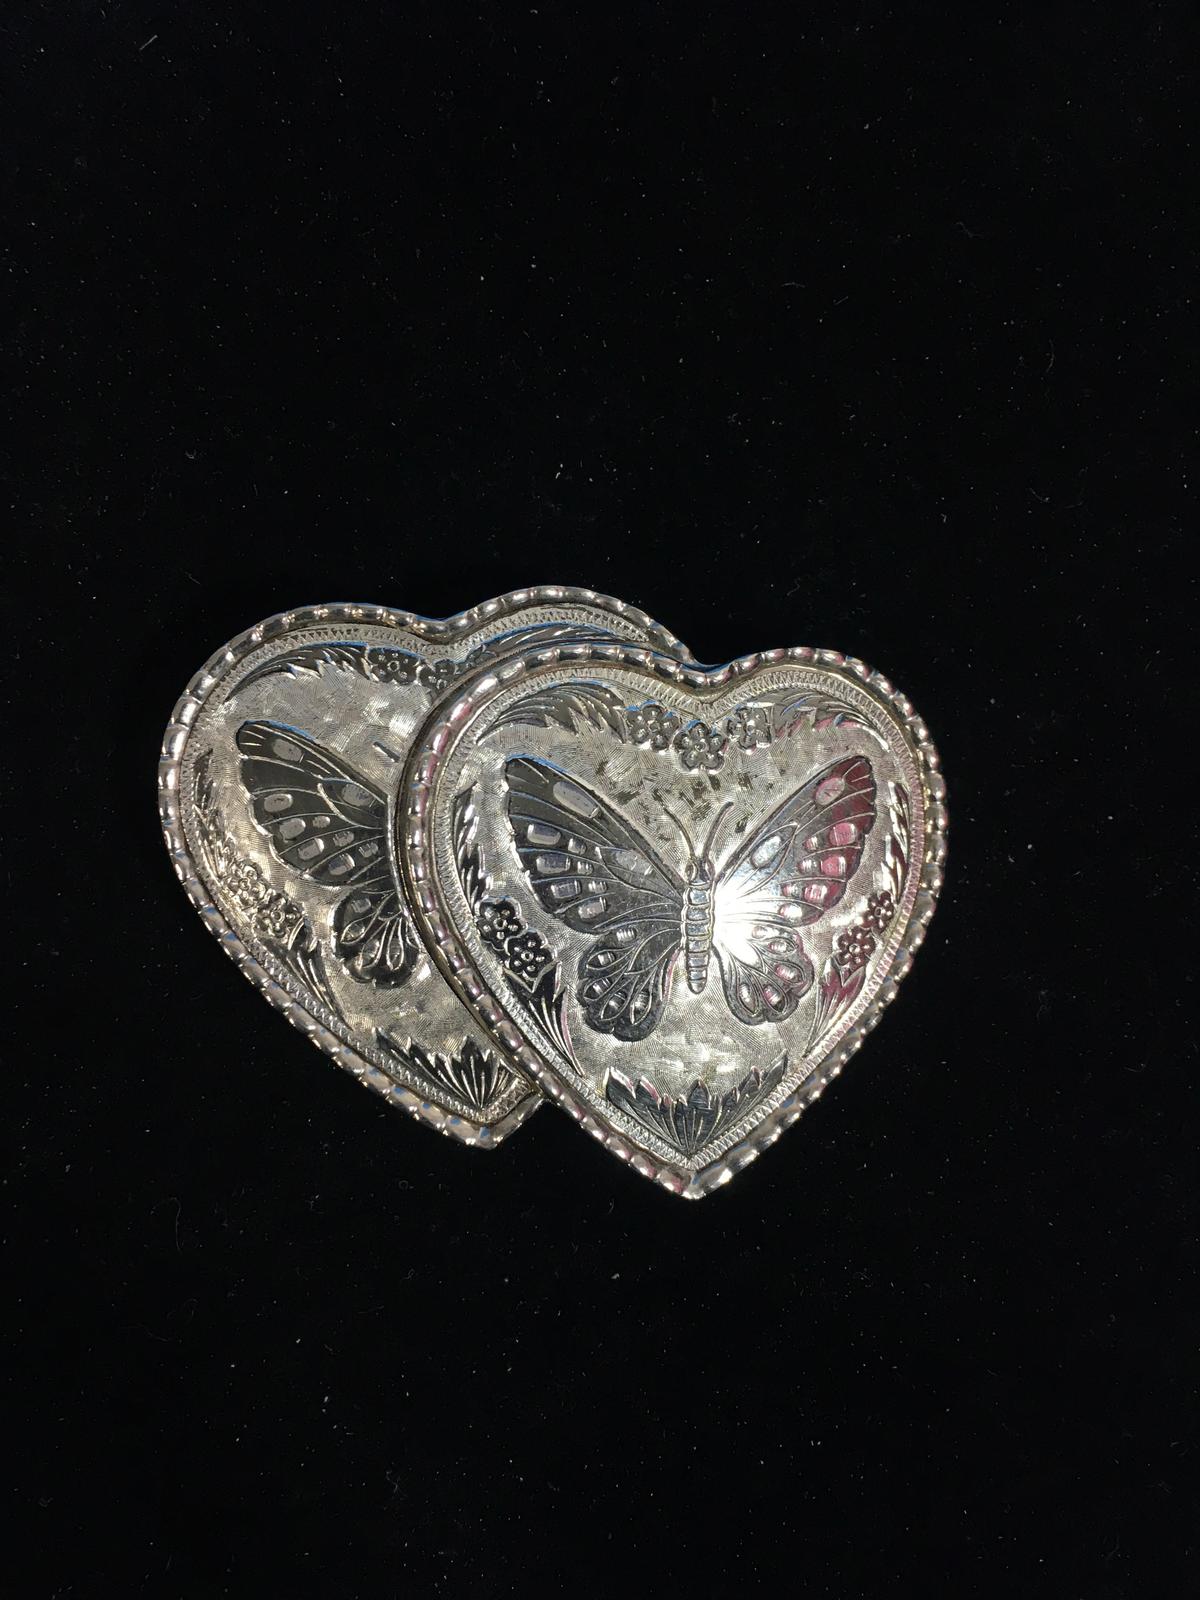 Dual Hearts with Butterflies Silver Tone Belt Buckle